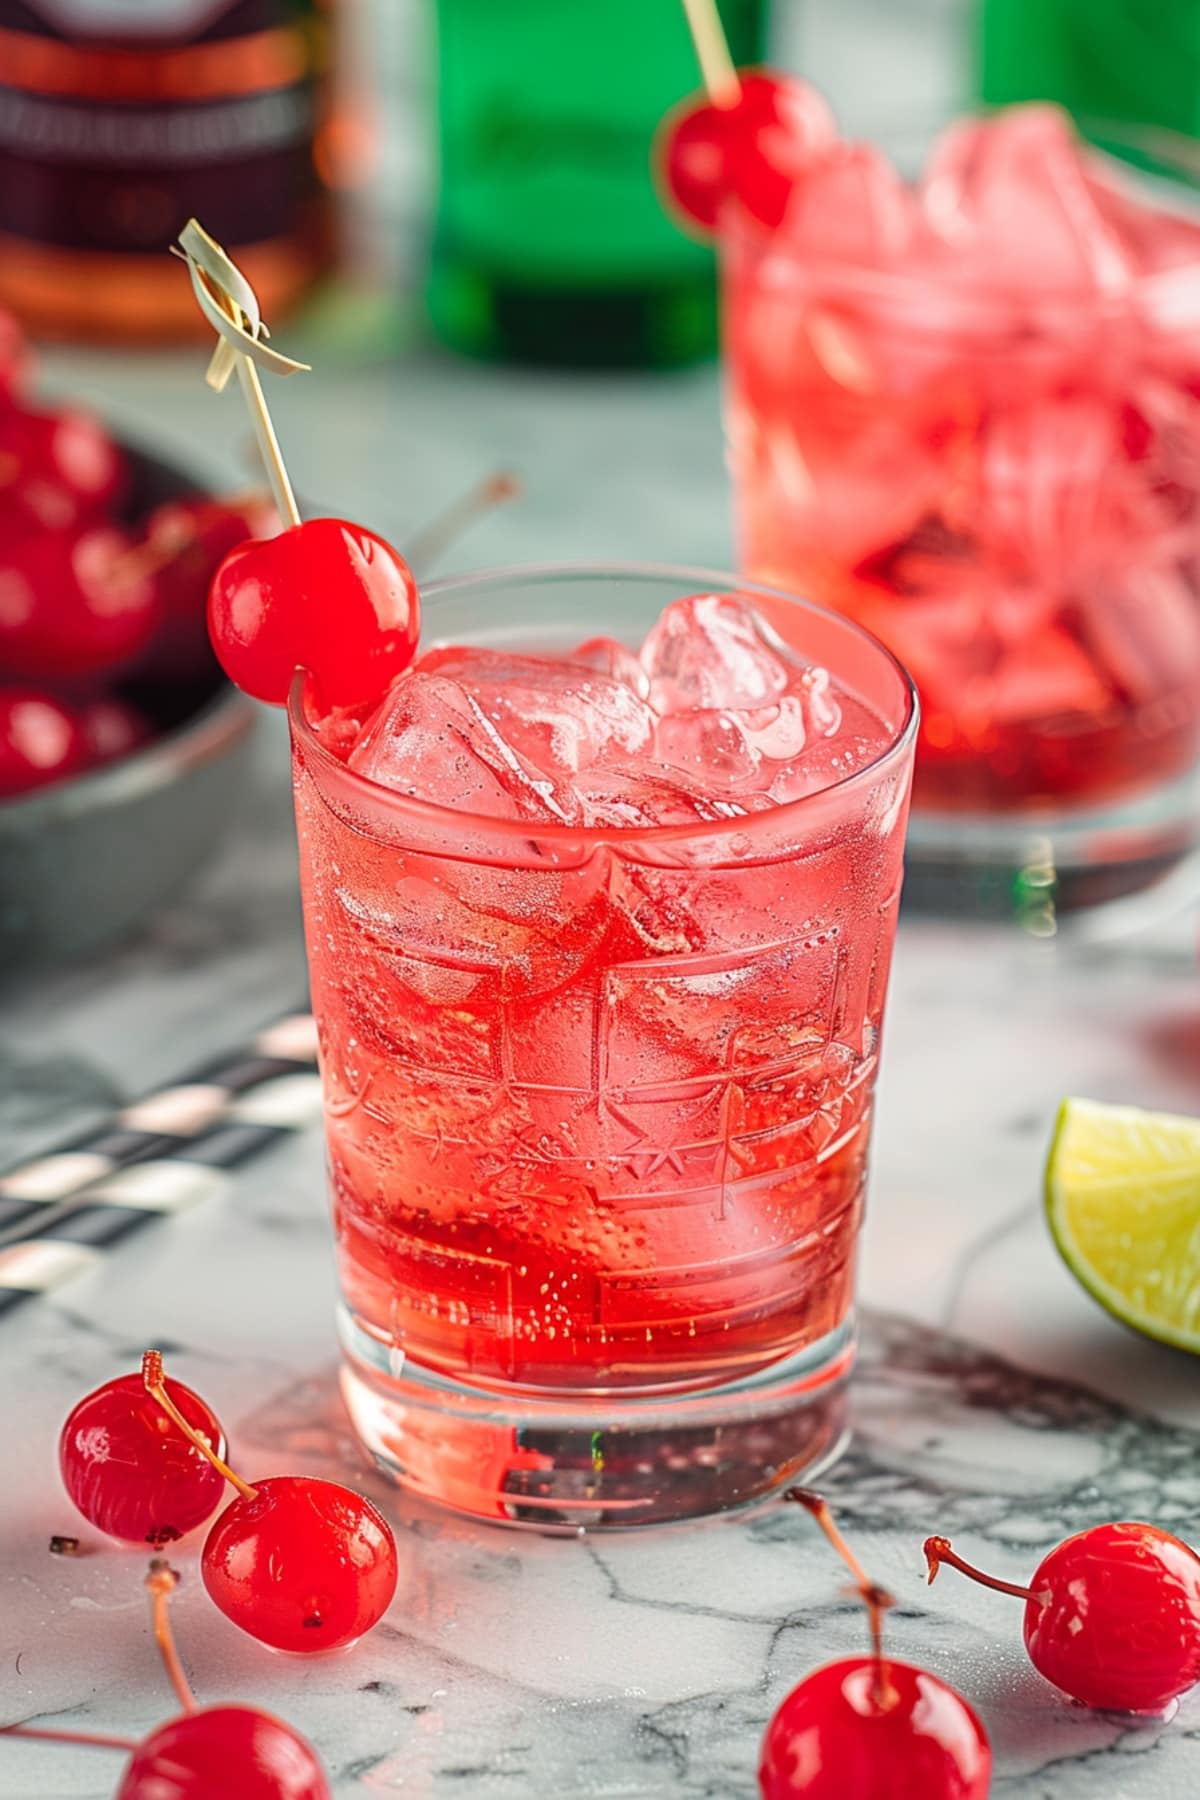 Homemade dirty shirley in a glass with vodka